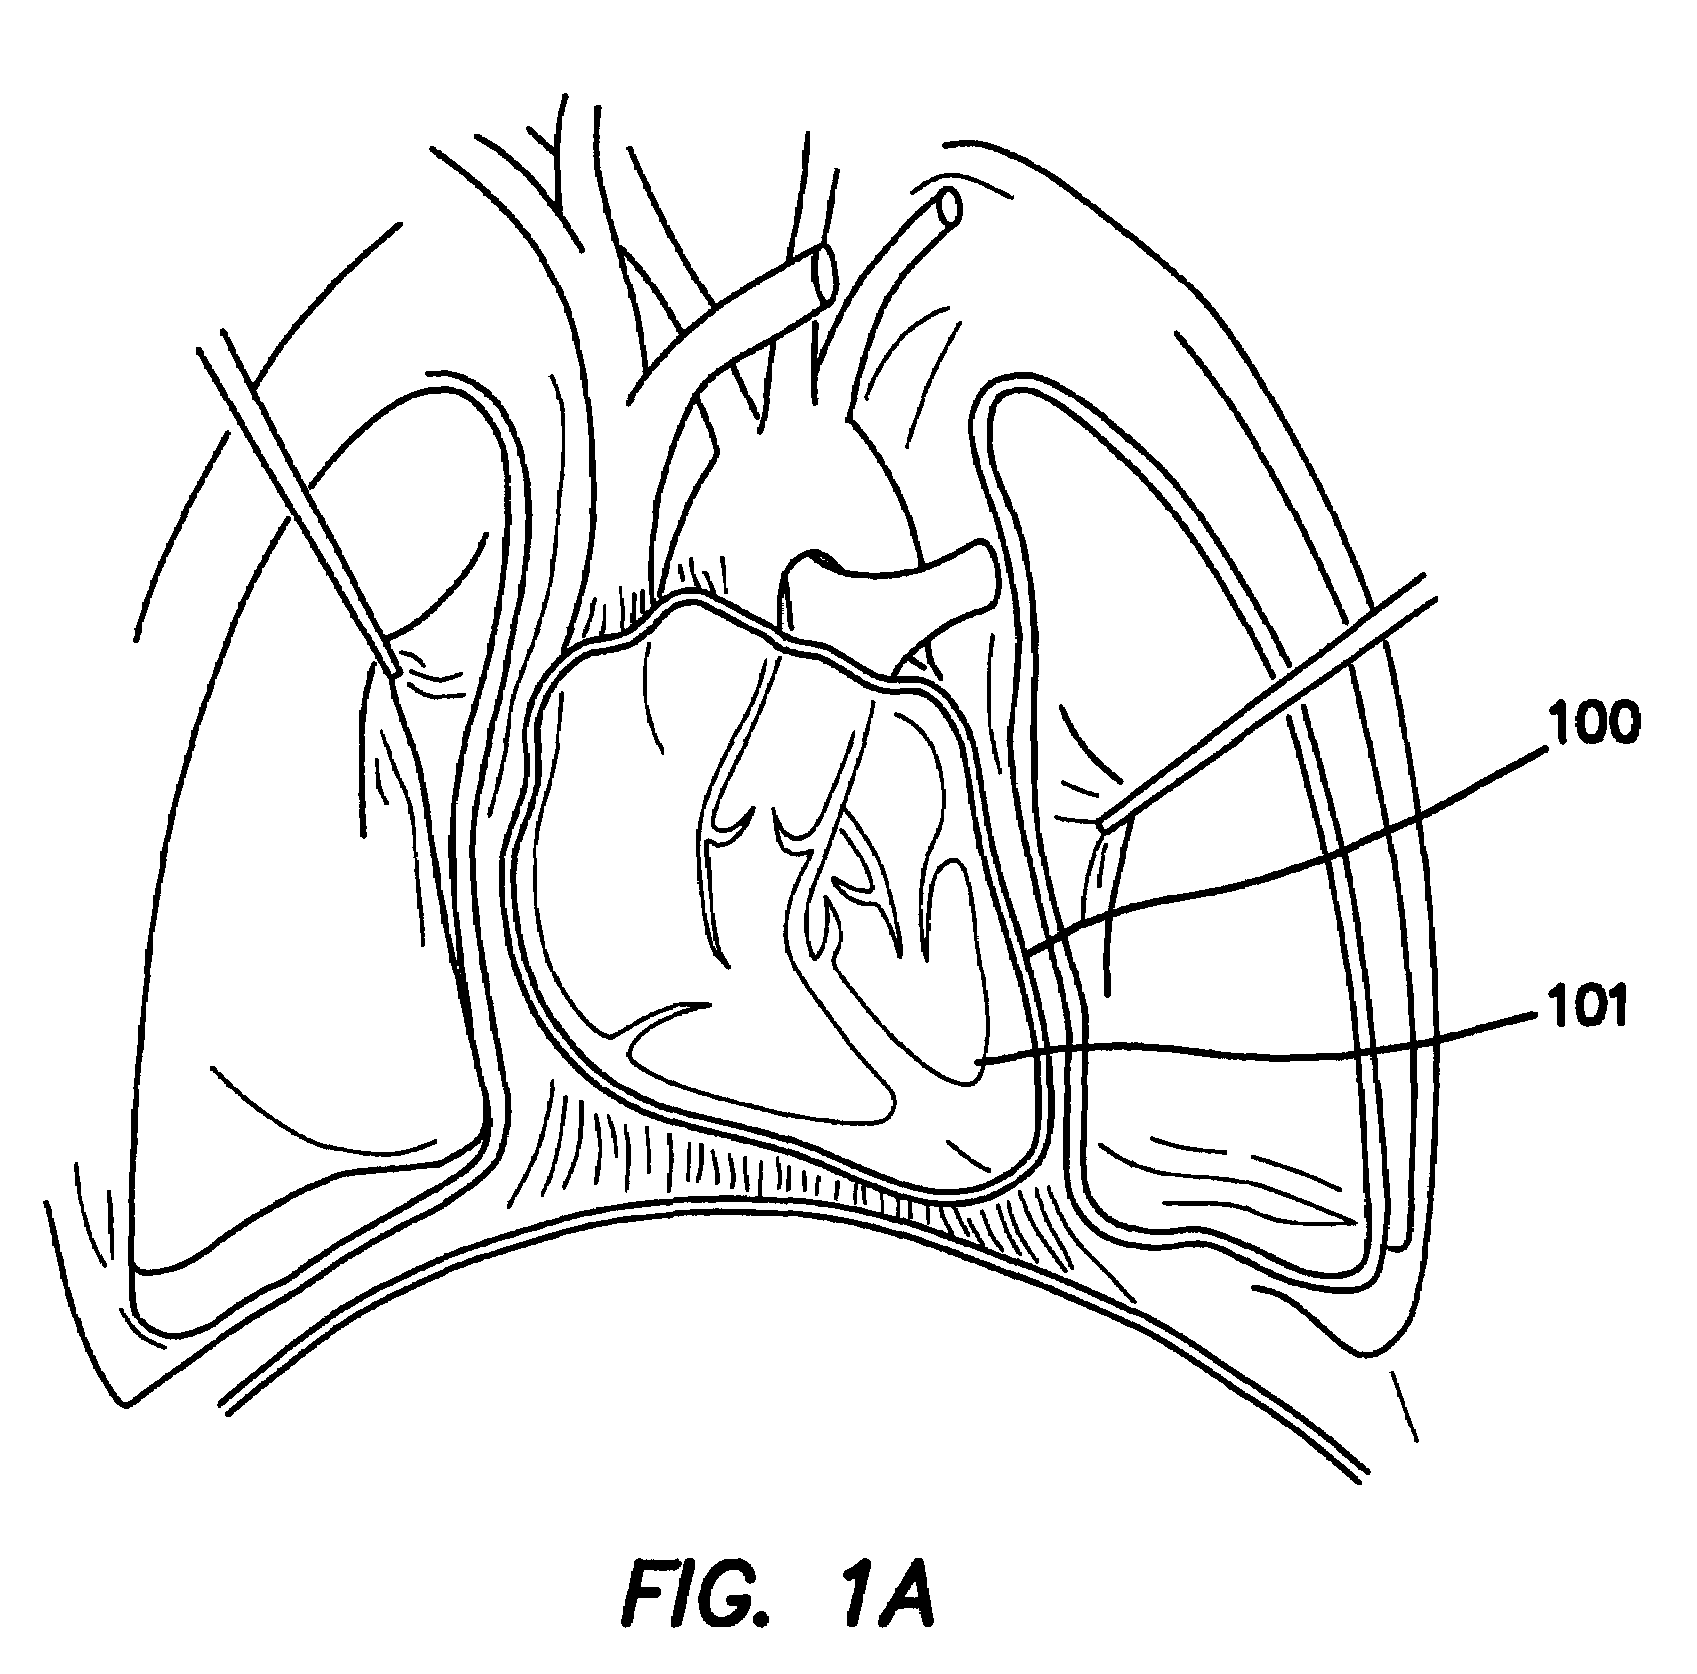 Methods of promoting enhanced healing of tissues after cardiac surgery